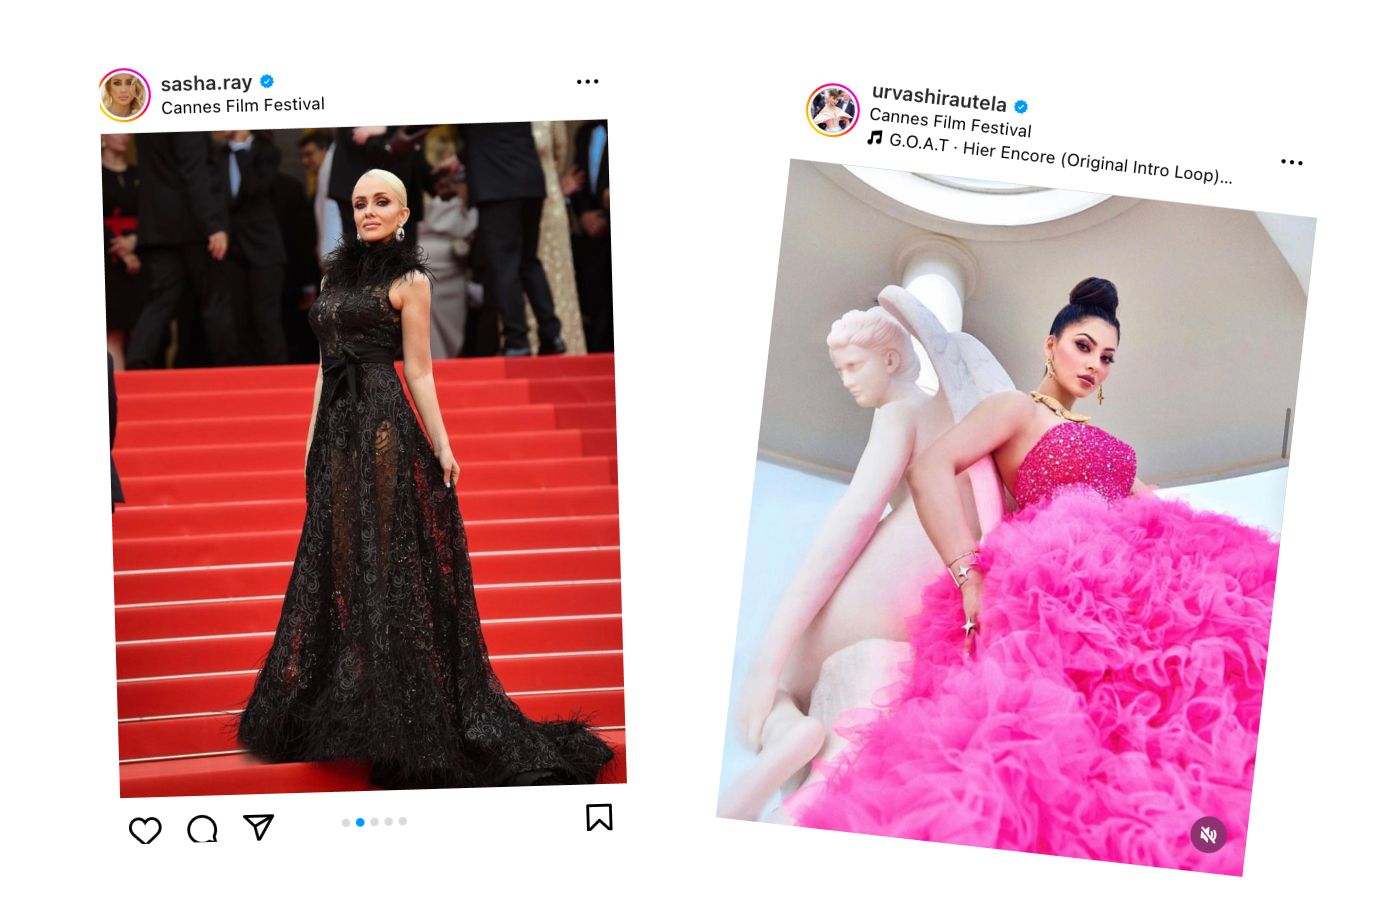 Ukranian singer Sasha Ray in sapphire and diamond earrings by TOi and Indian actress Urvashi Rautela in a ring and arm cuff by TOi, both at the Cannes Film Festival 2023